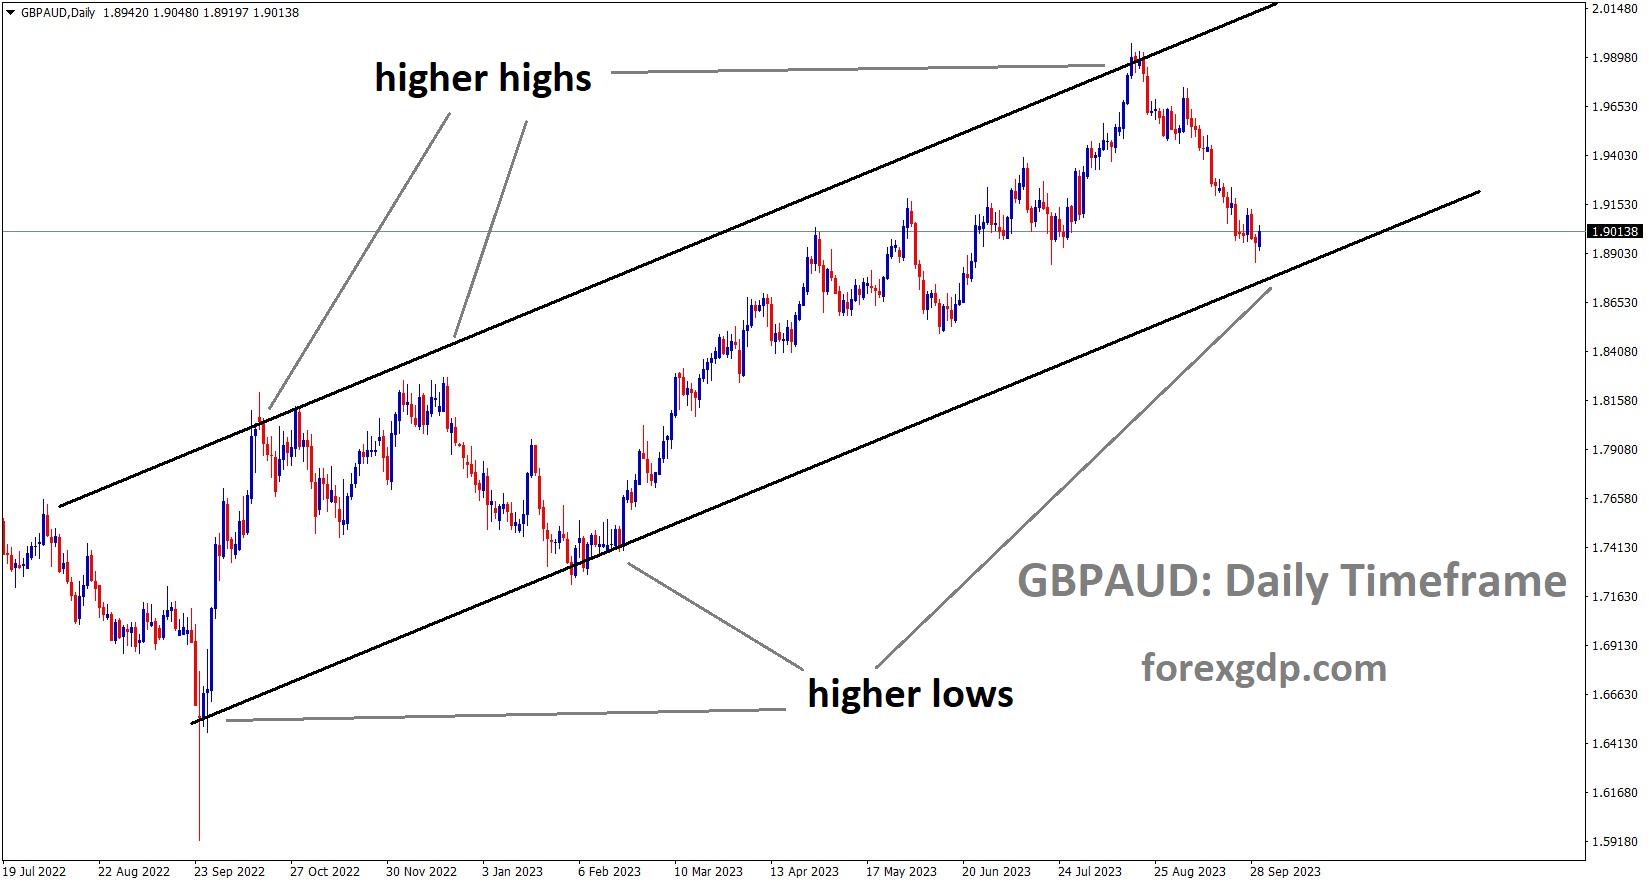 GBPAUD is moving in an Ascending channel and the market has reached the higher low area of the channel